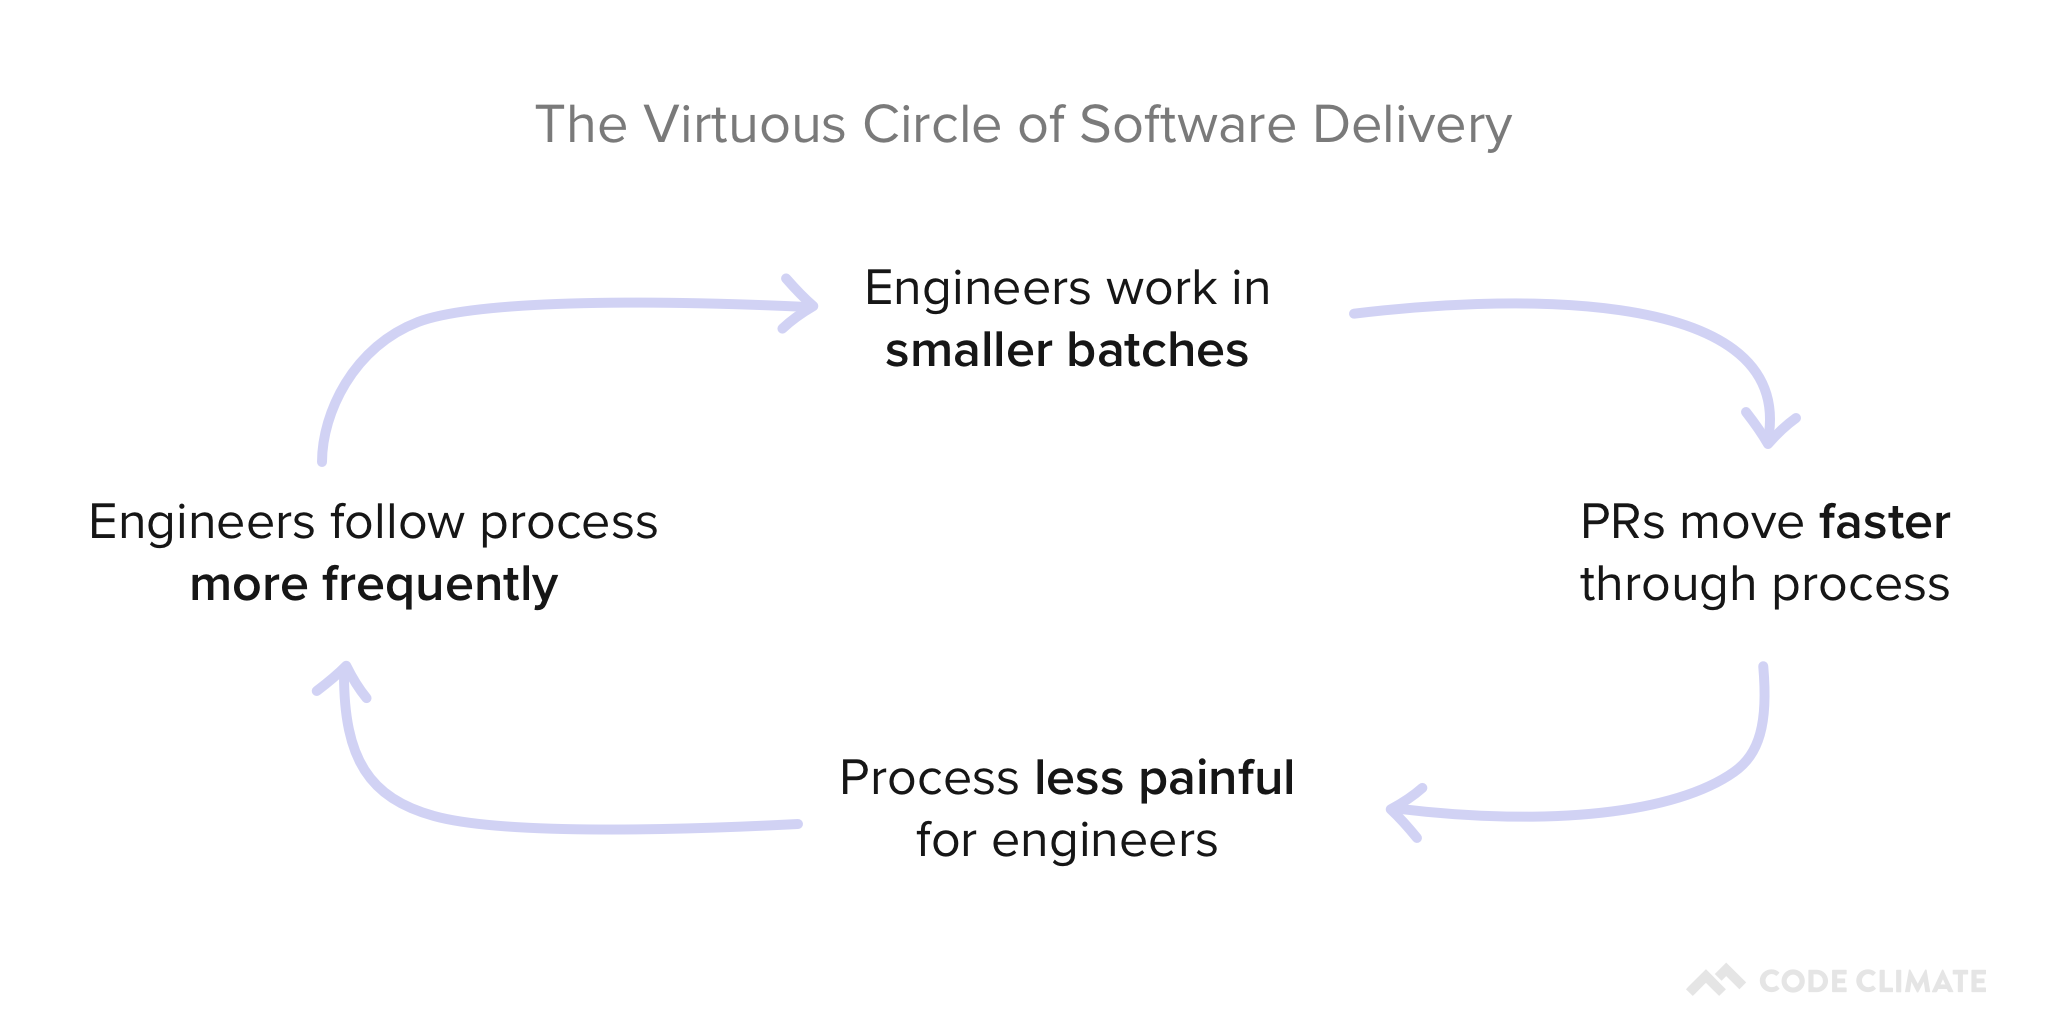 Virtuous cycle of software delivery